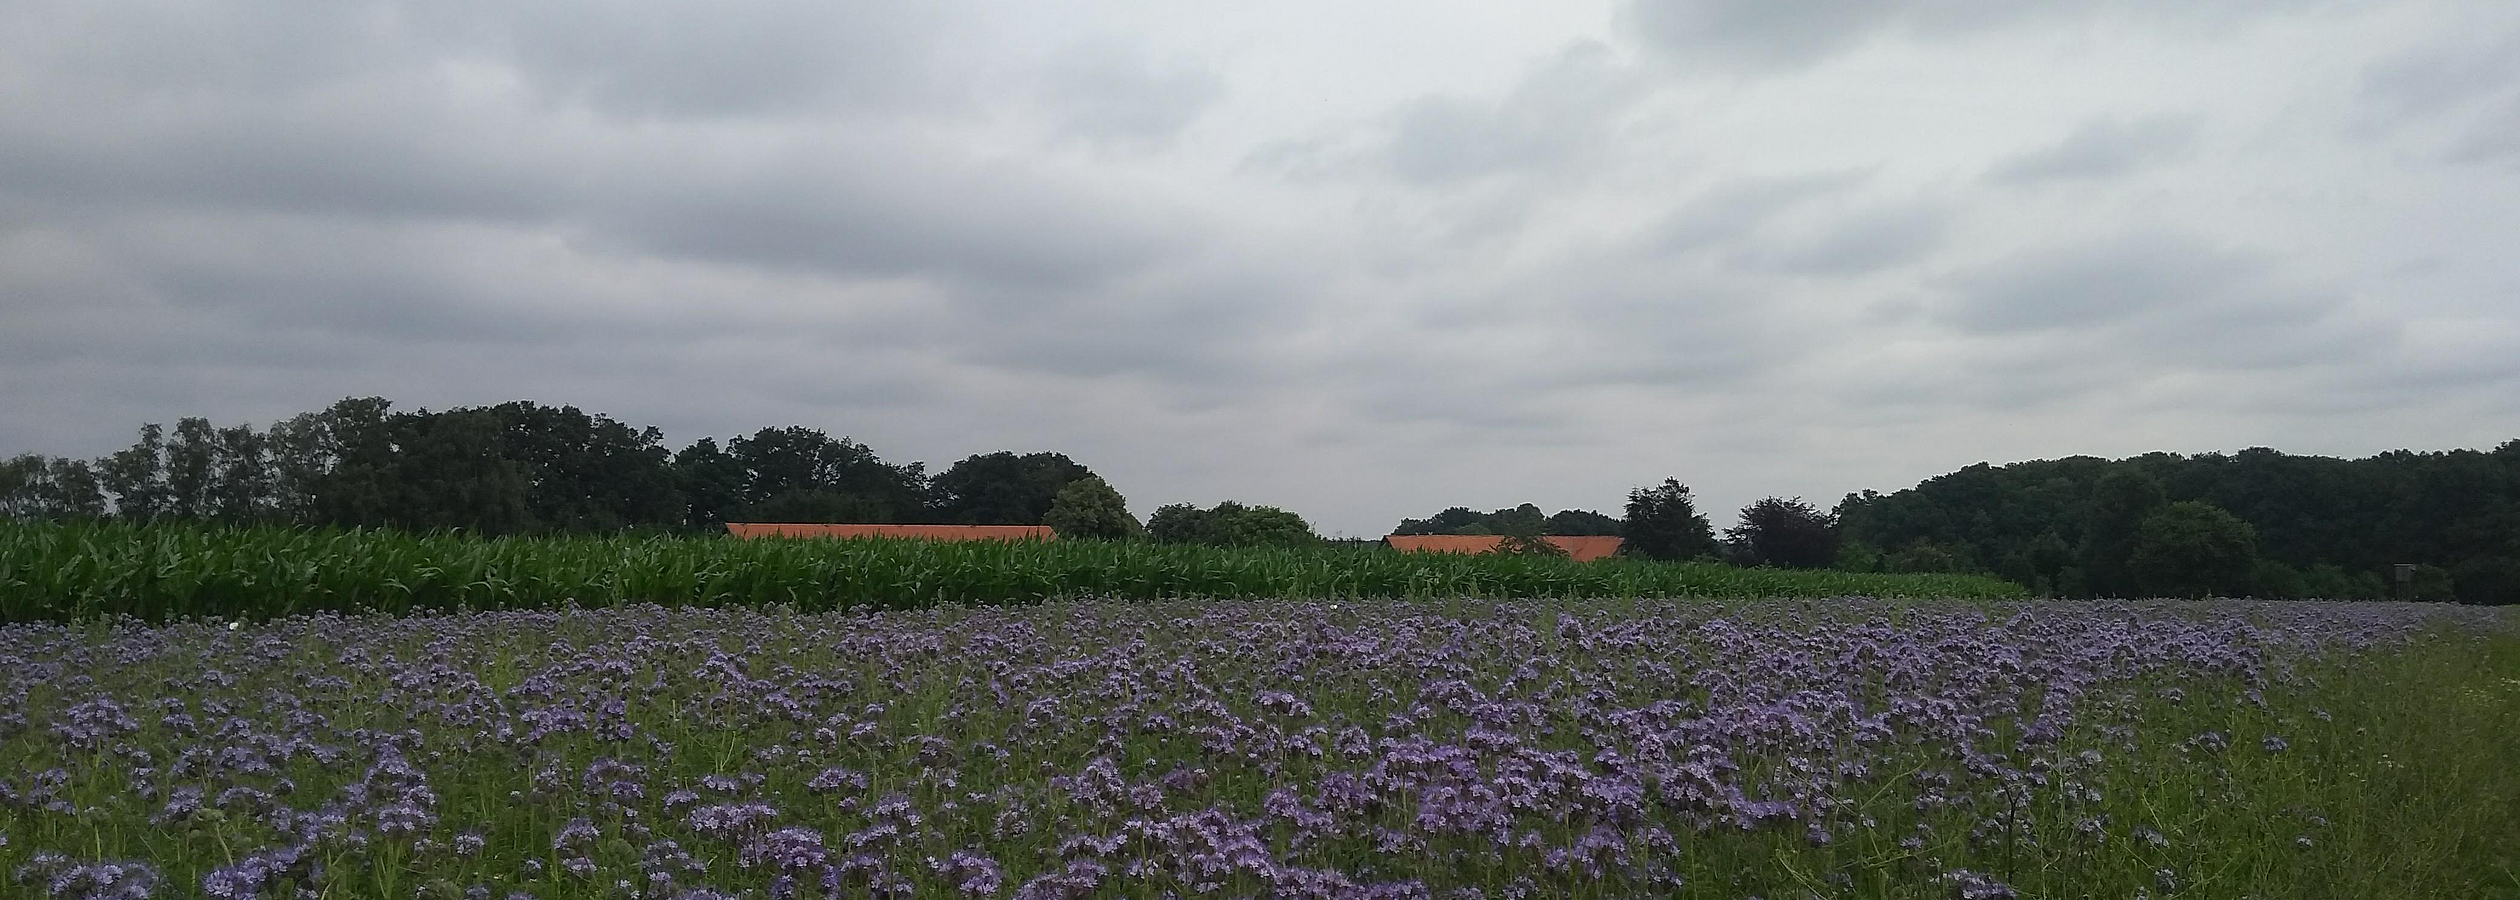 the agriculture field in Asendorf